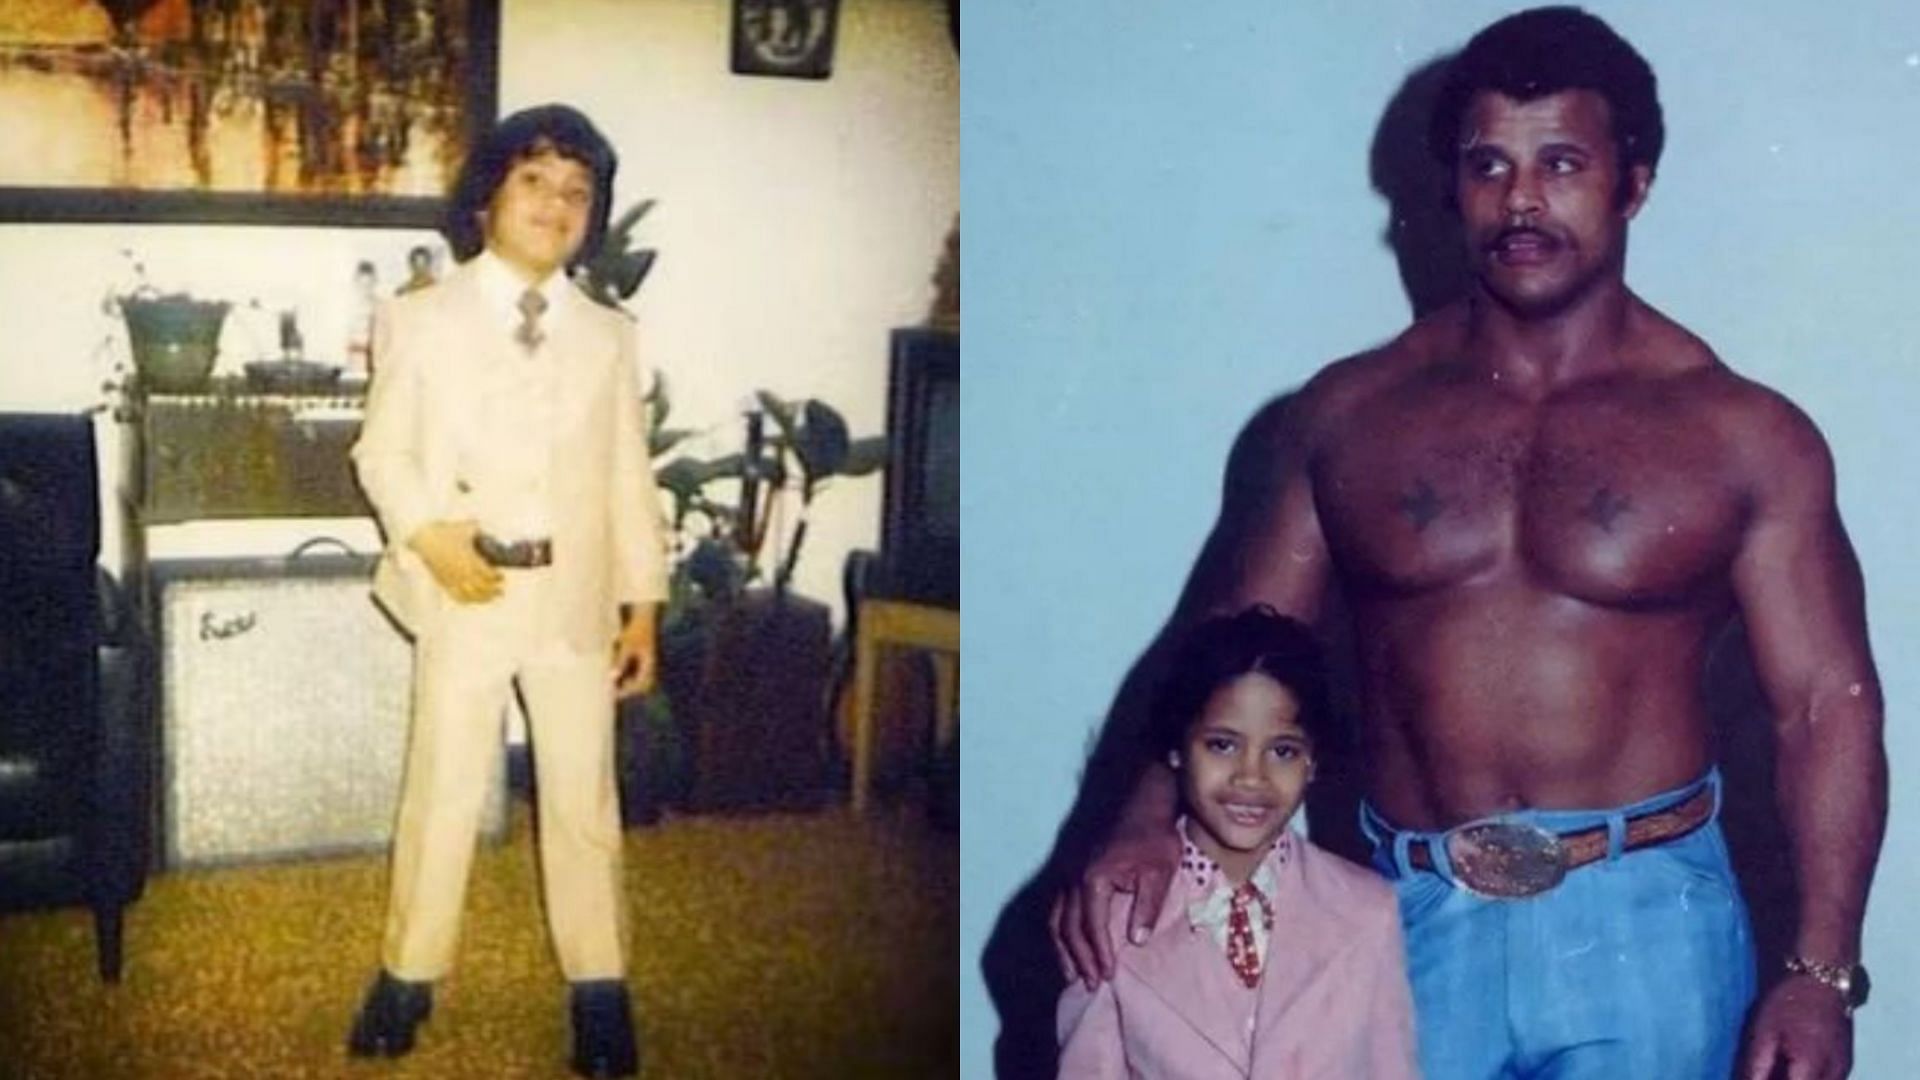 Dwayne Johnson dated a 13-year-old when he was 10